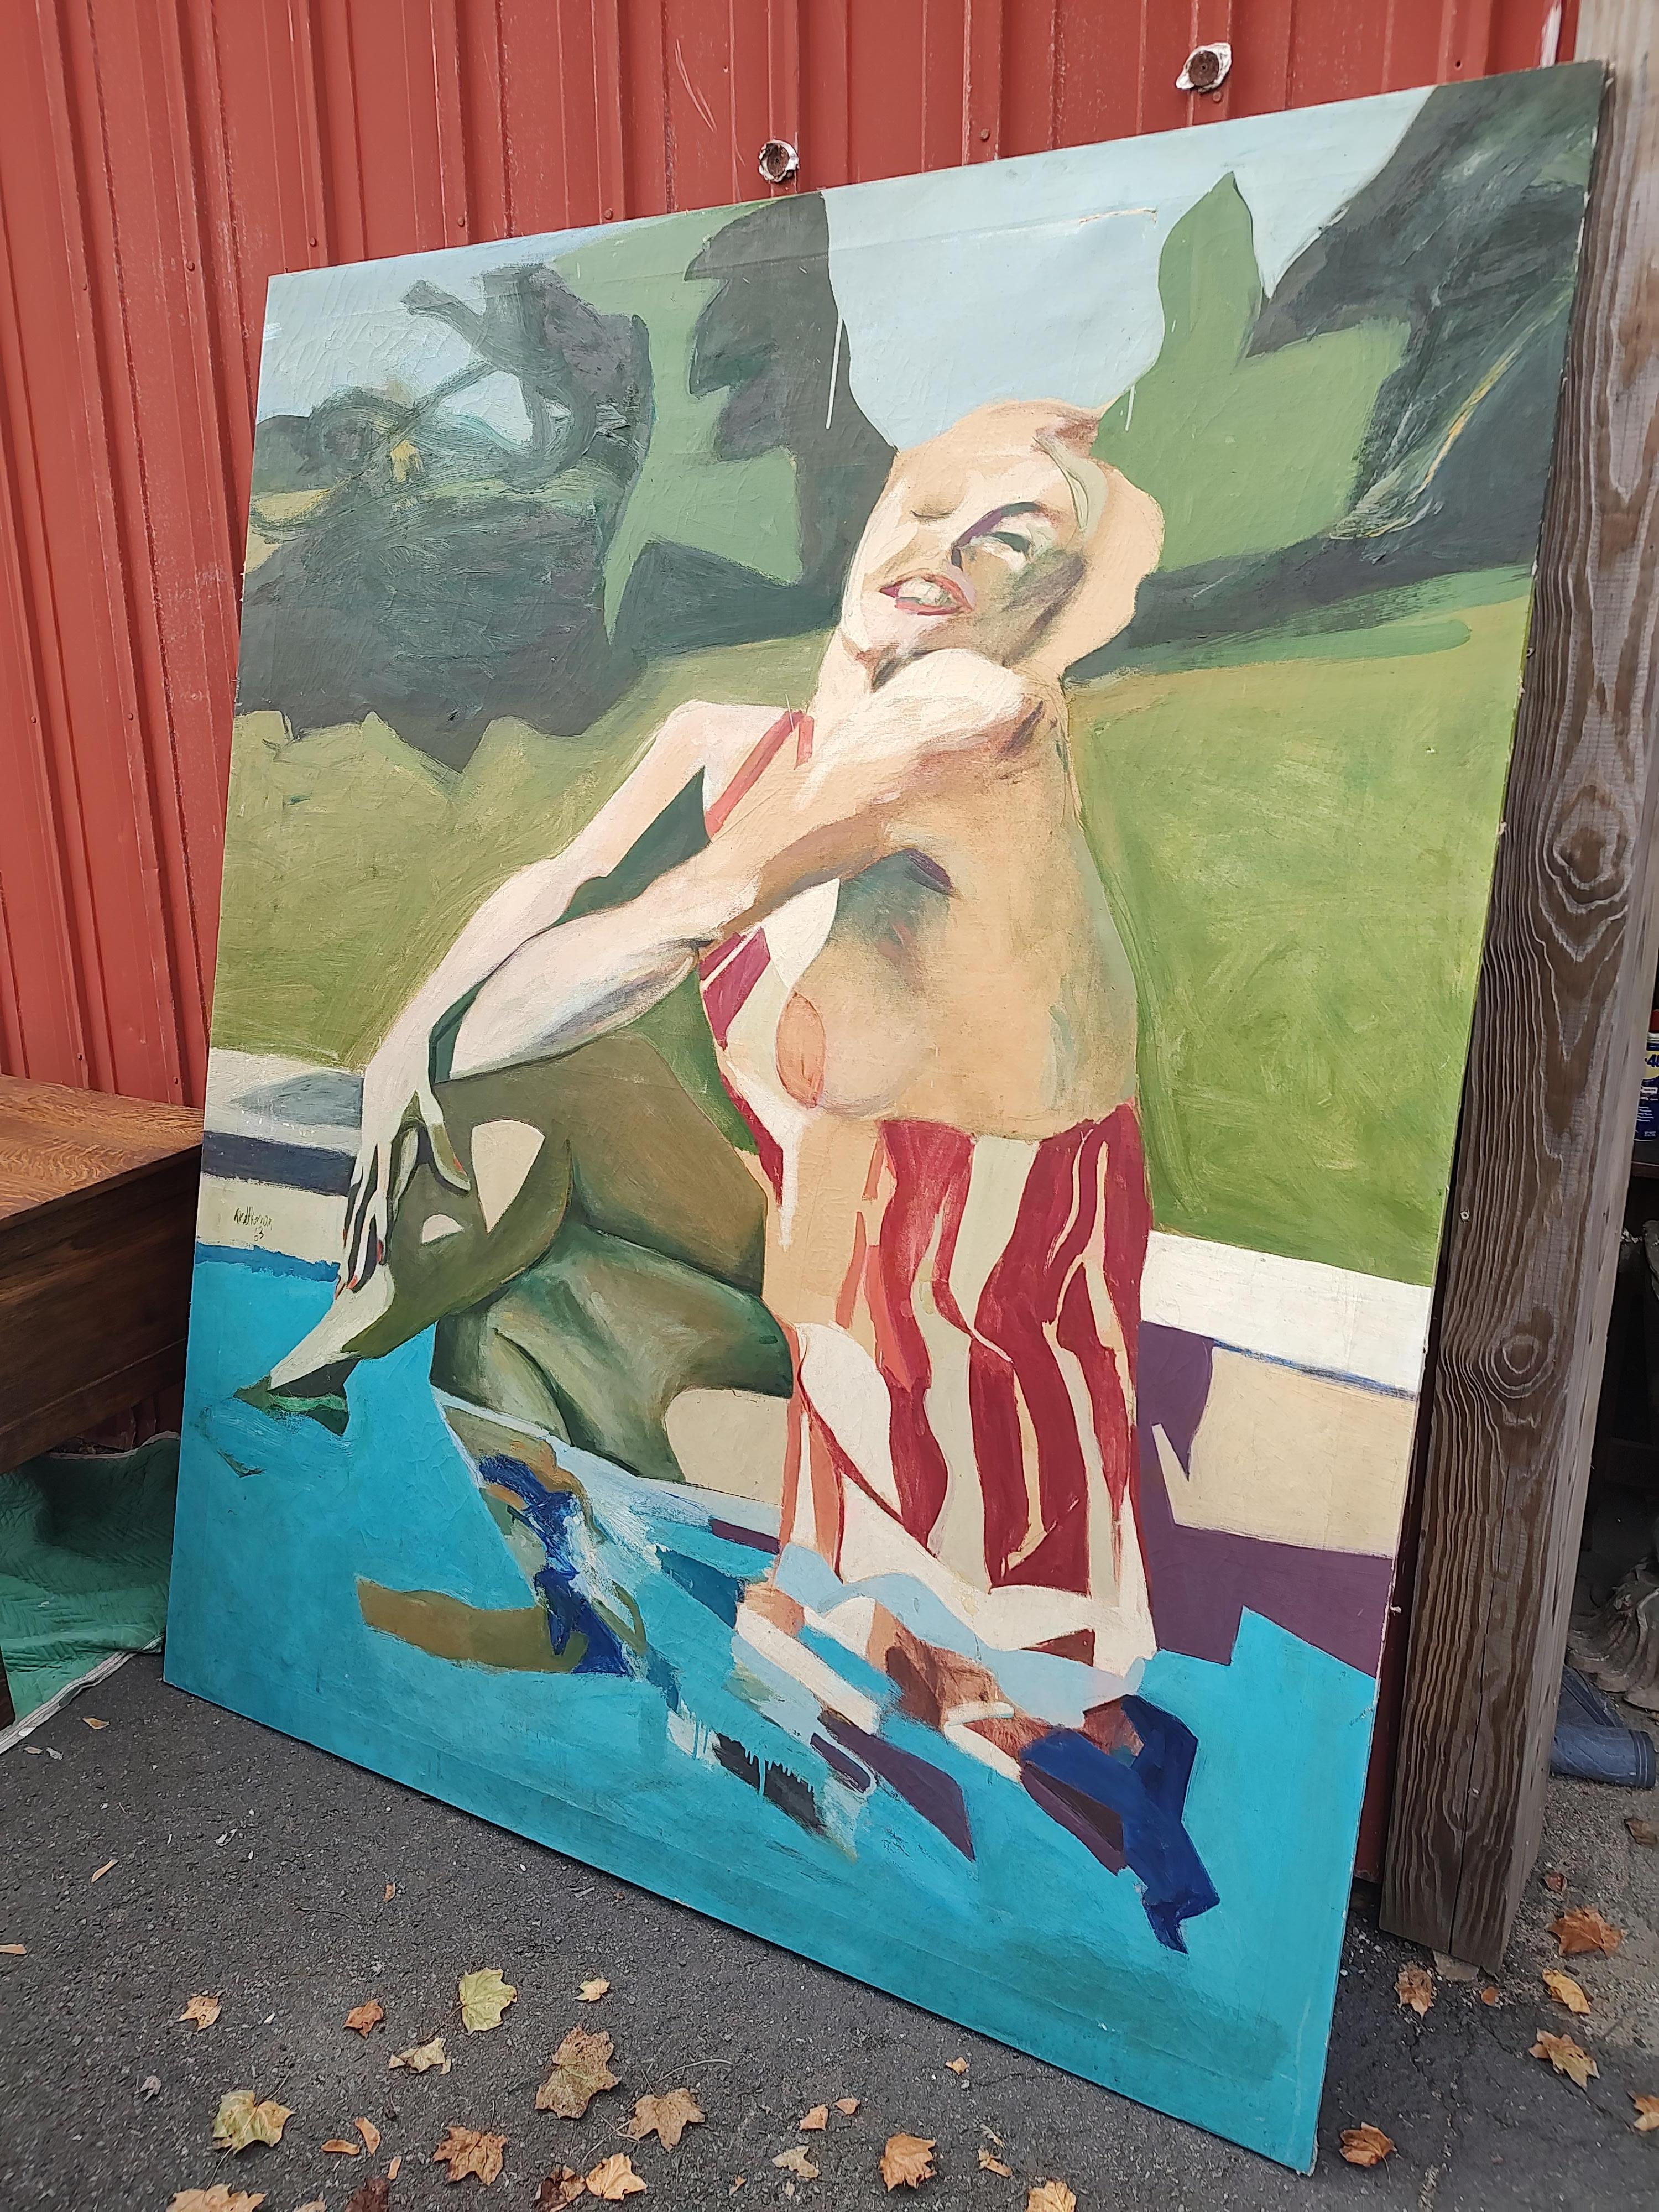 Large Mid Century Modern Painting of a Marilynesque Figure by the Pool 1963 In Good Condition For Sale In Port Jervis, NY